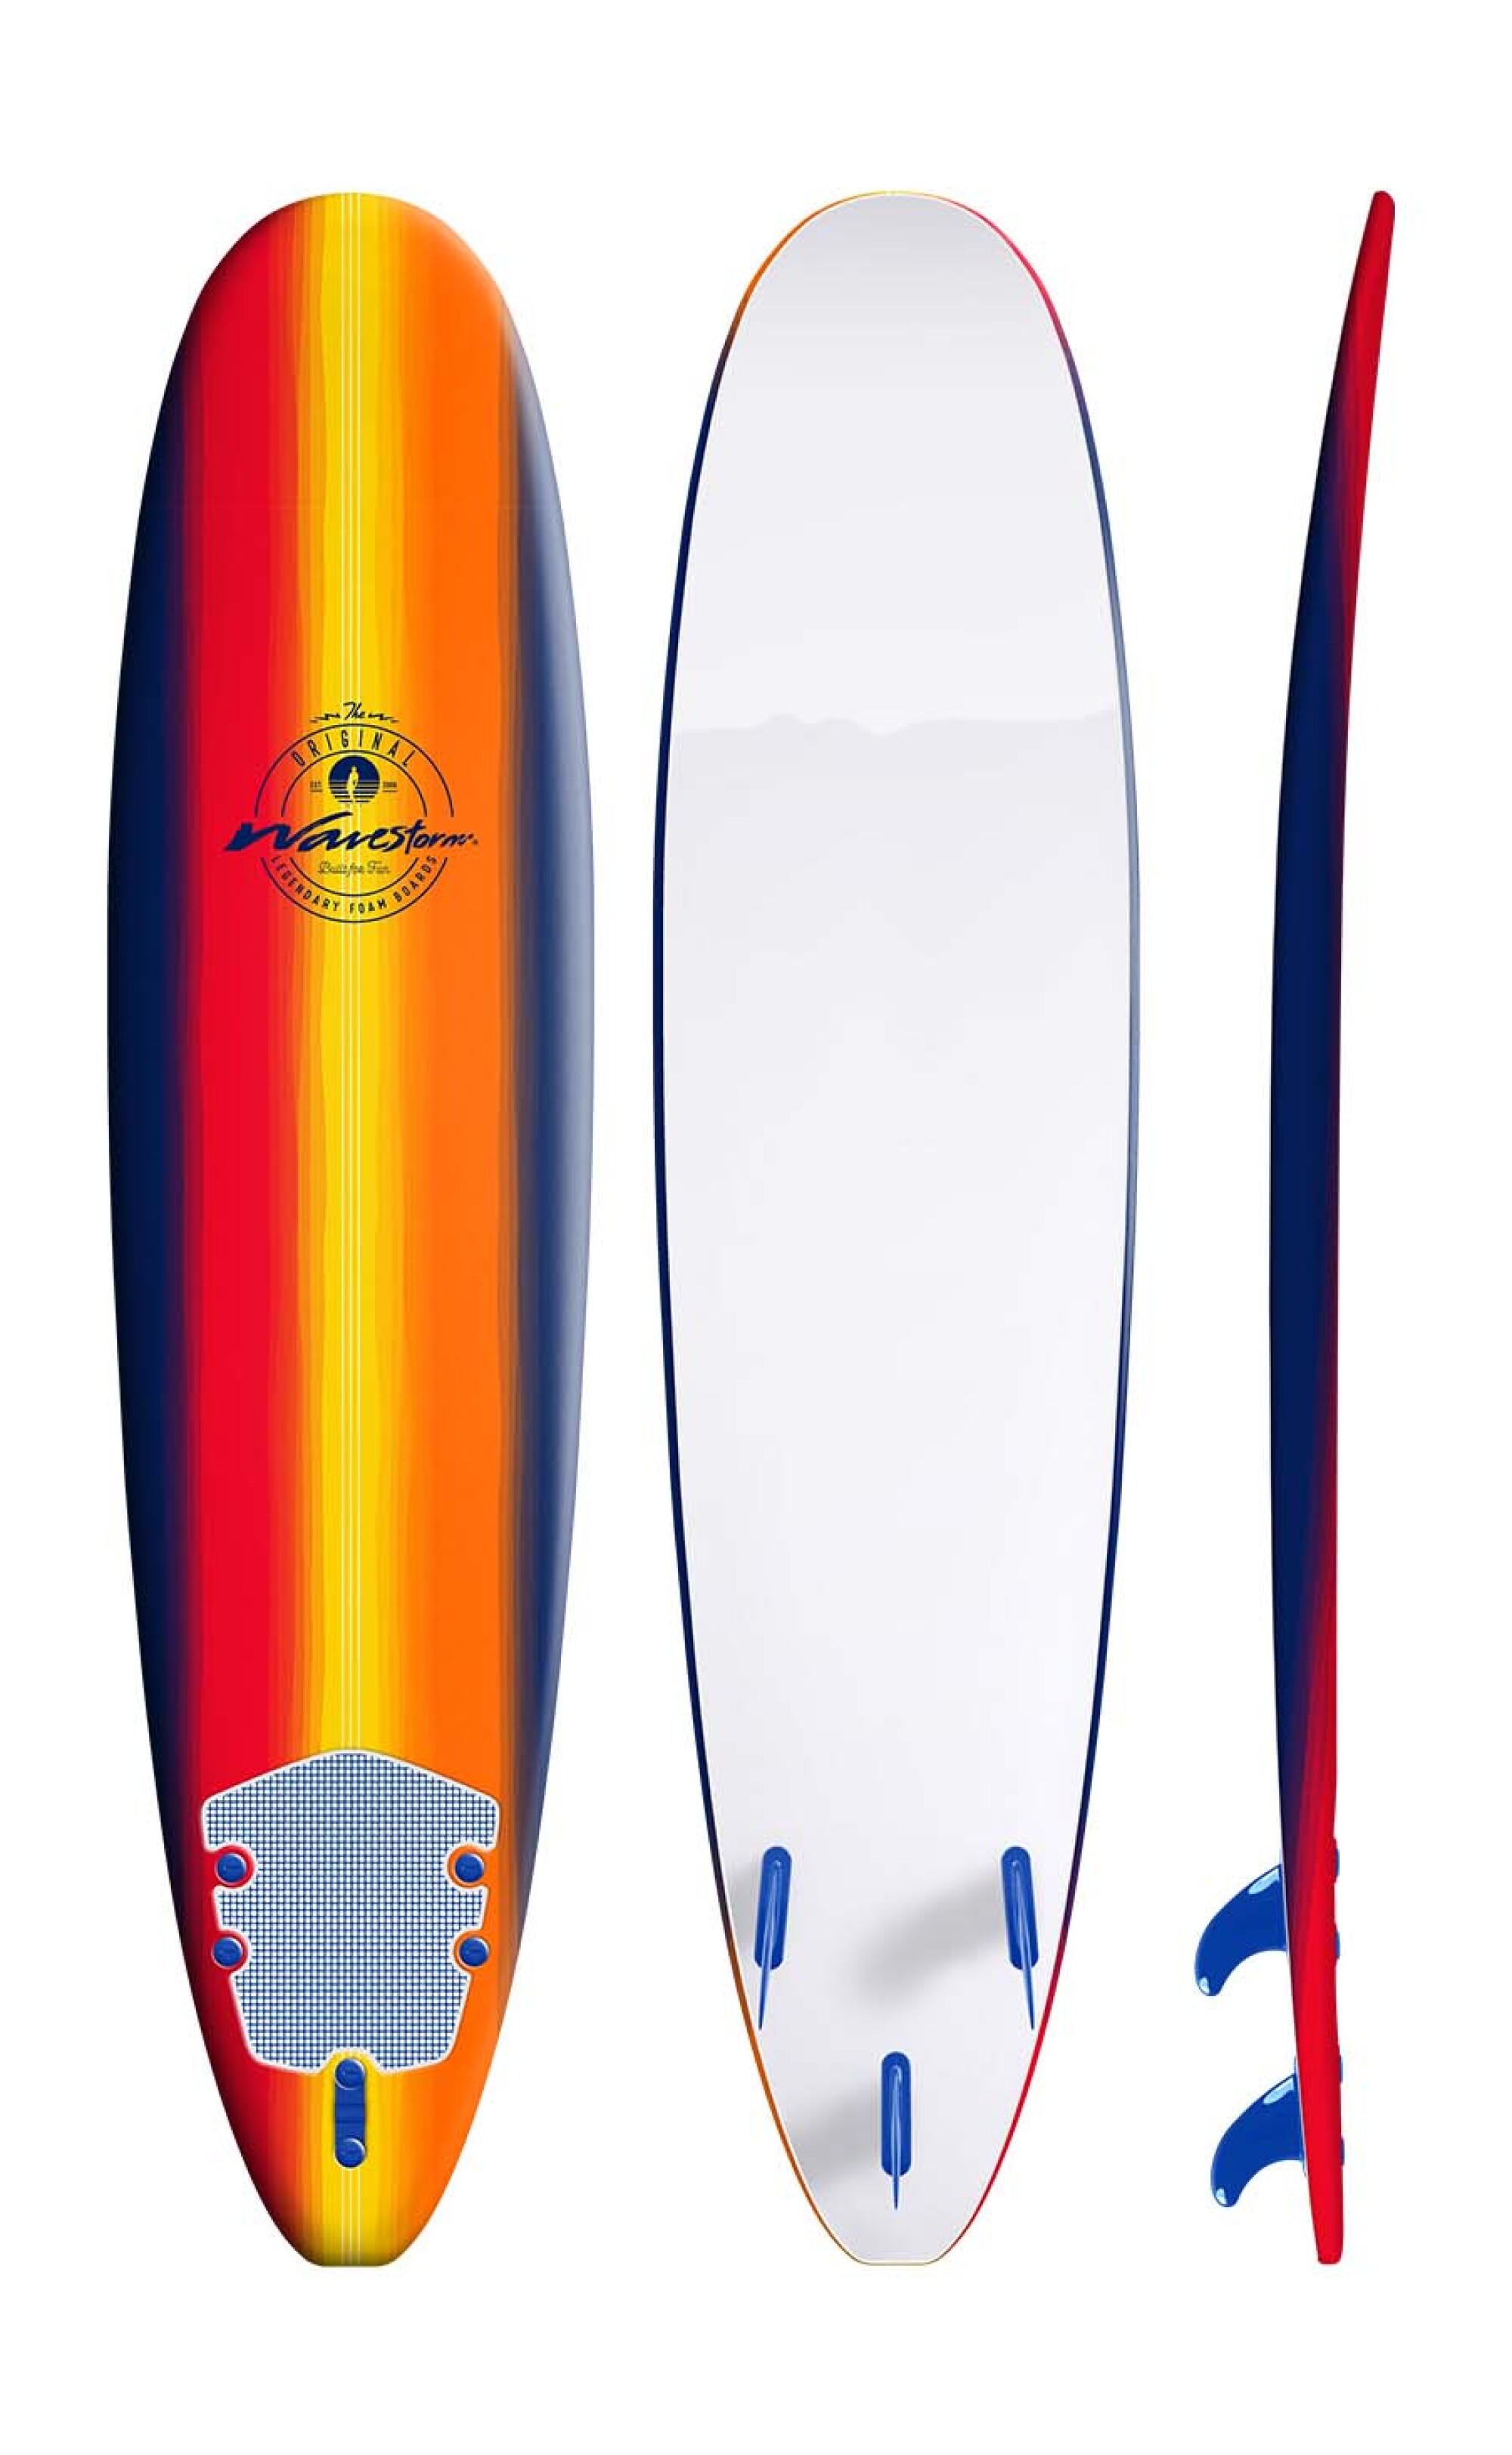 Different views of a soft surfboard.